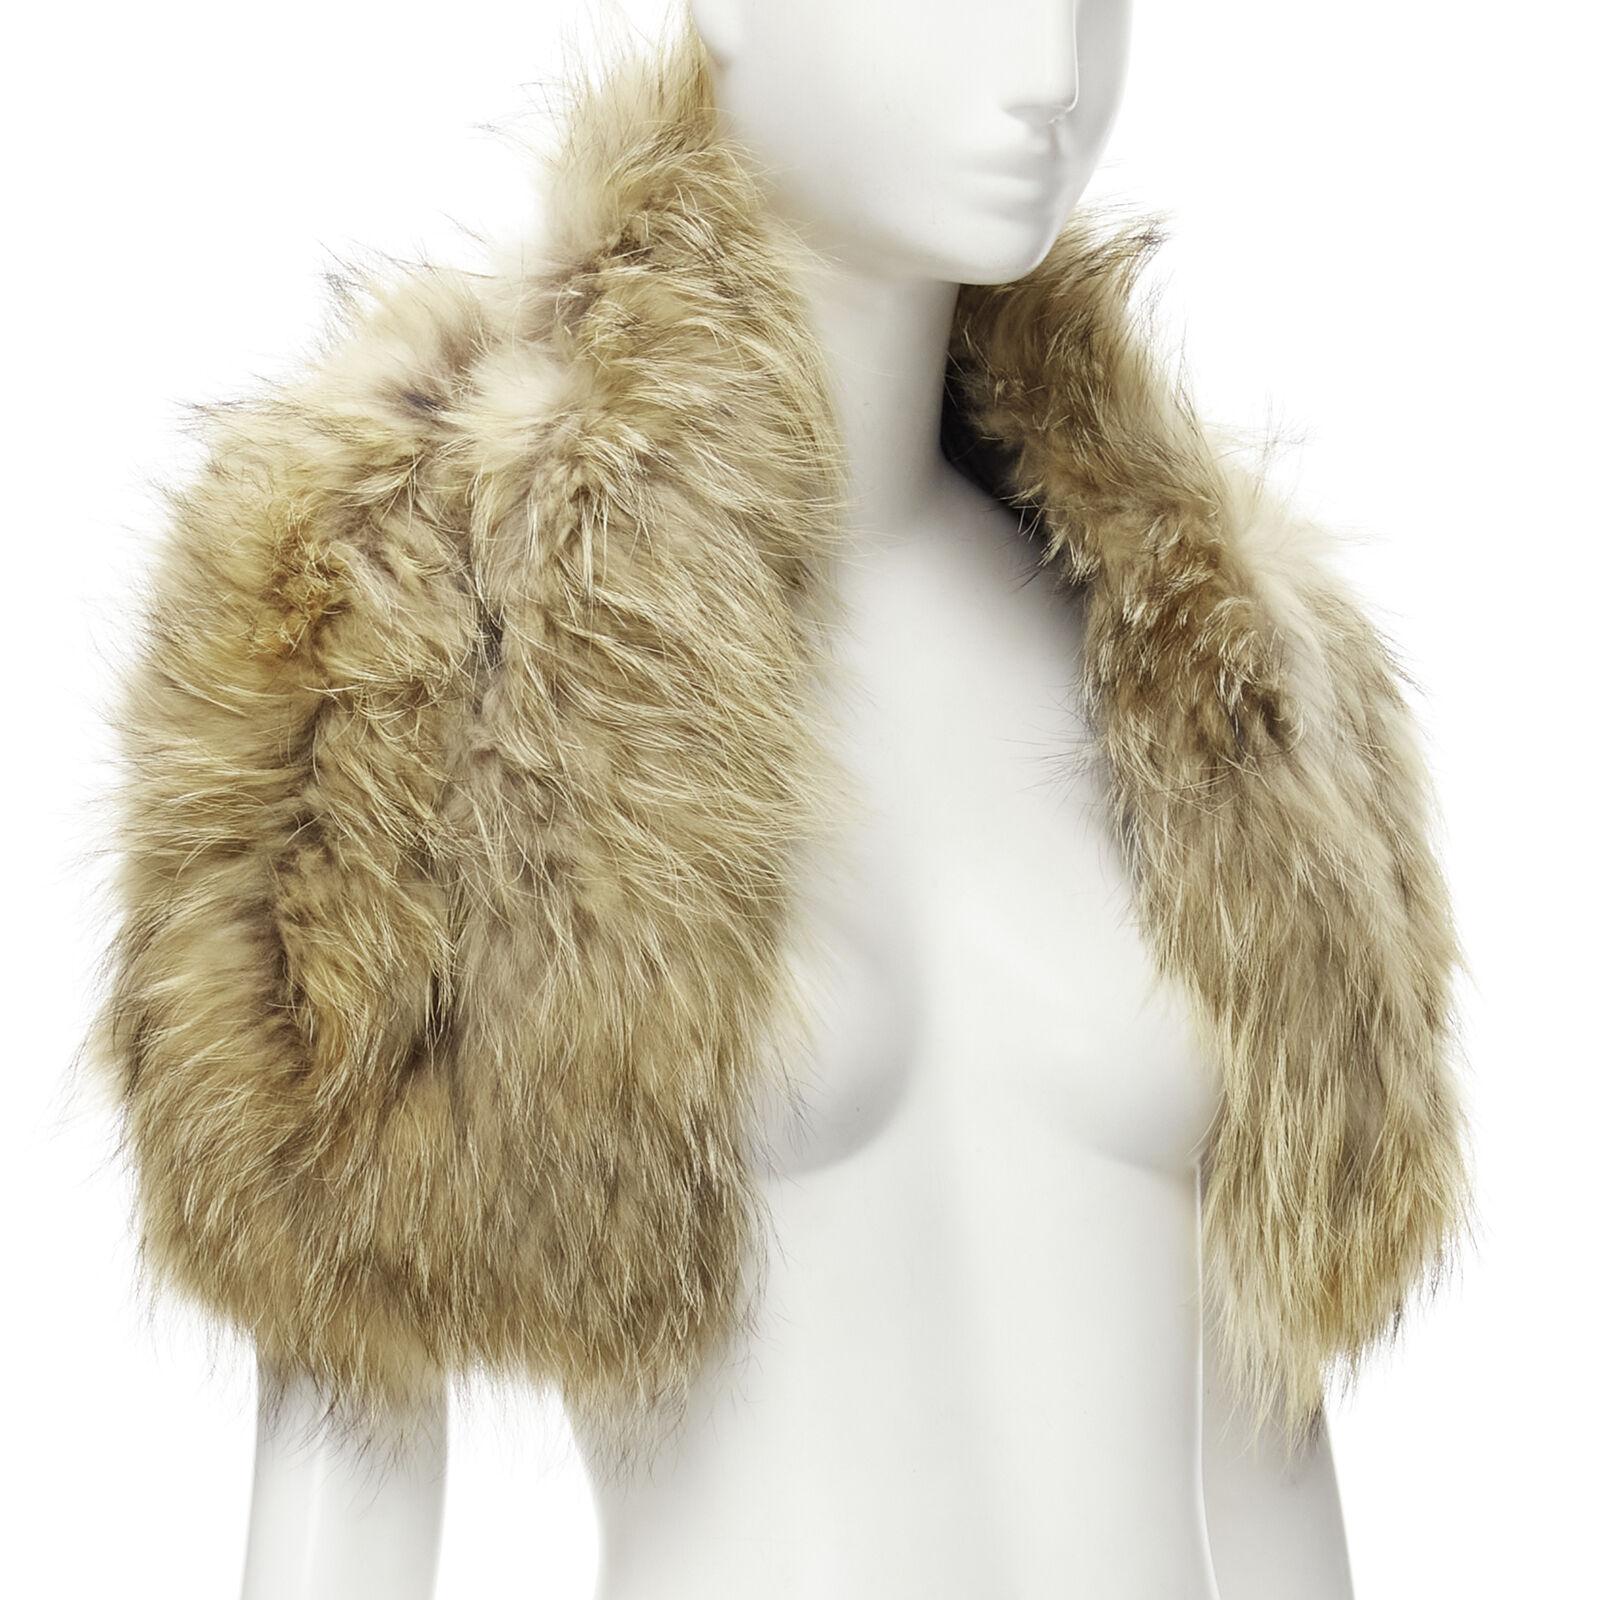 CHARLOTTE SIMONE 100% fur brown asymmetric silk lined collar cuff scarf
Reference: LNKO/A02080
Brand: Charlotte Simone
Material: Fur
Color: Brown
Pattern: Solid
Lining: Silk
Made in: China

CONDITION:
Condition: Excellent, this item was pre-owned